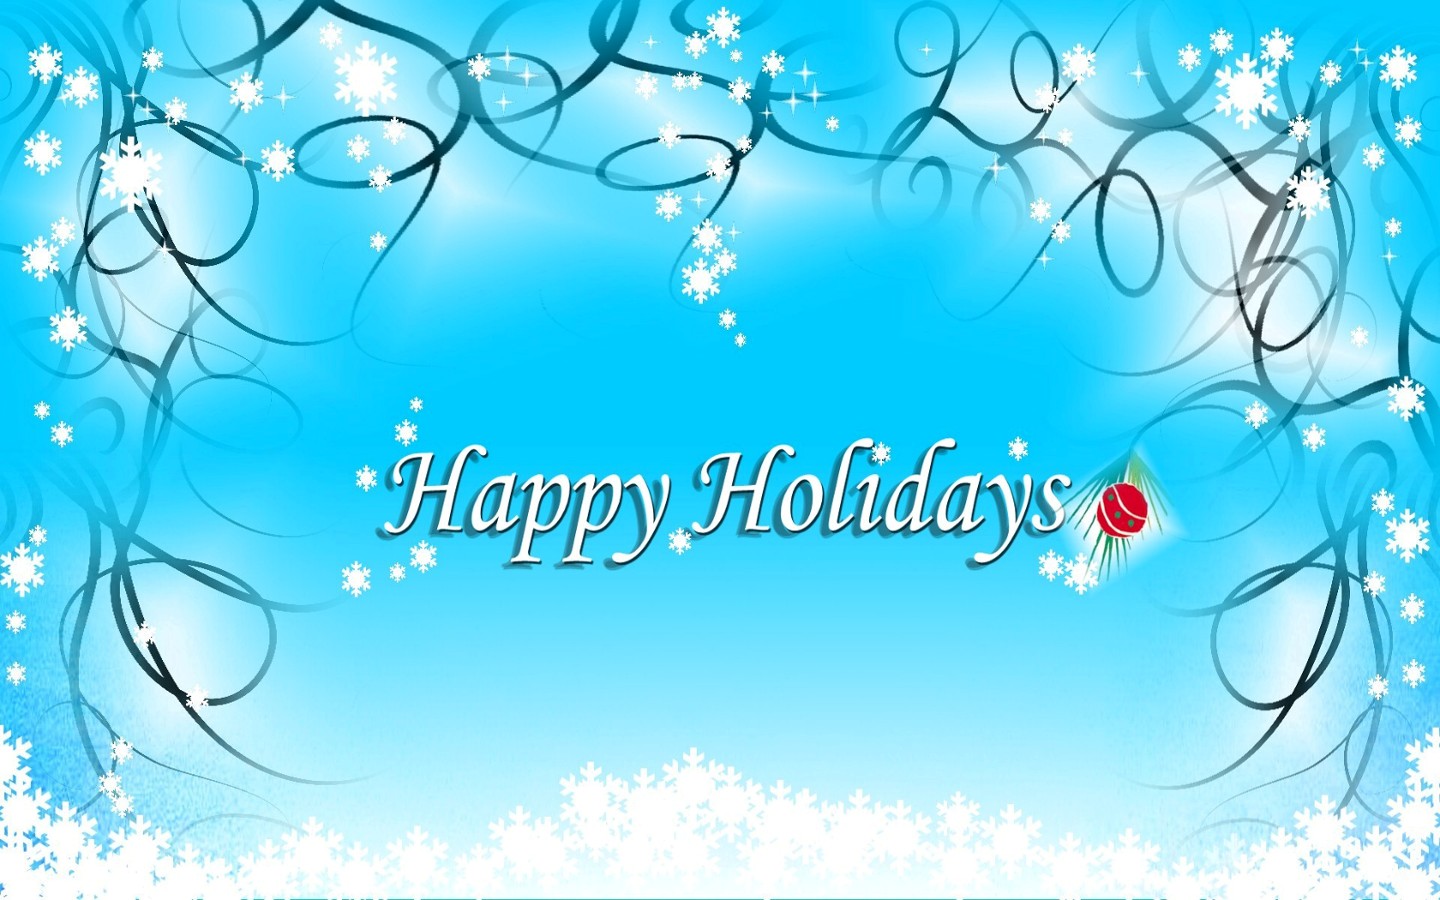 Happy Holidays Wallpaper Gallery Of